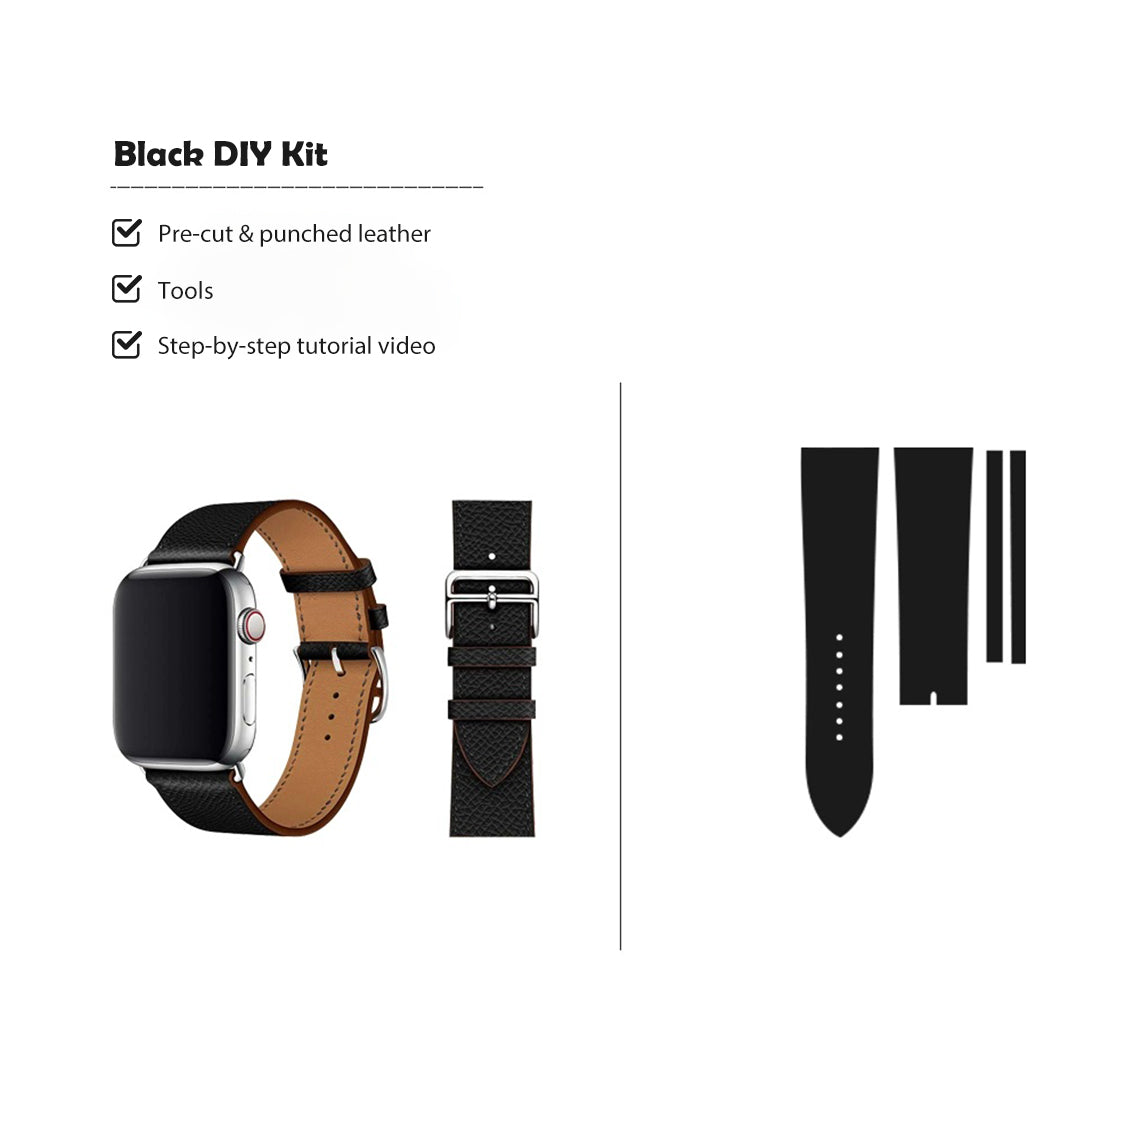 Two Tone Apple Watch Band | Black Watch Band DIY Leather Kit